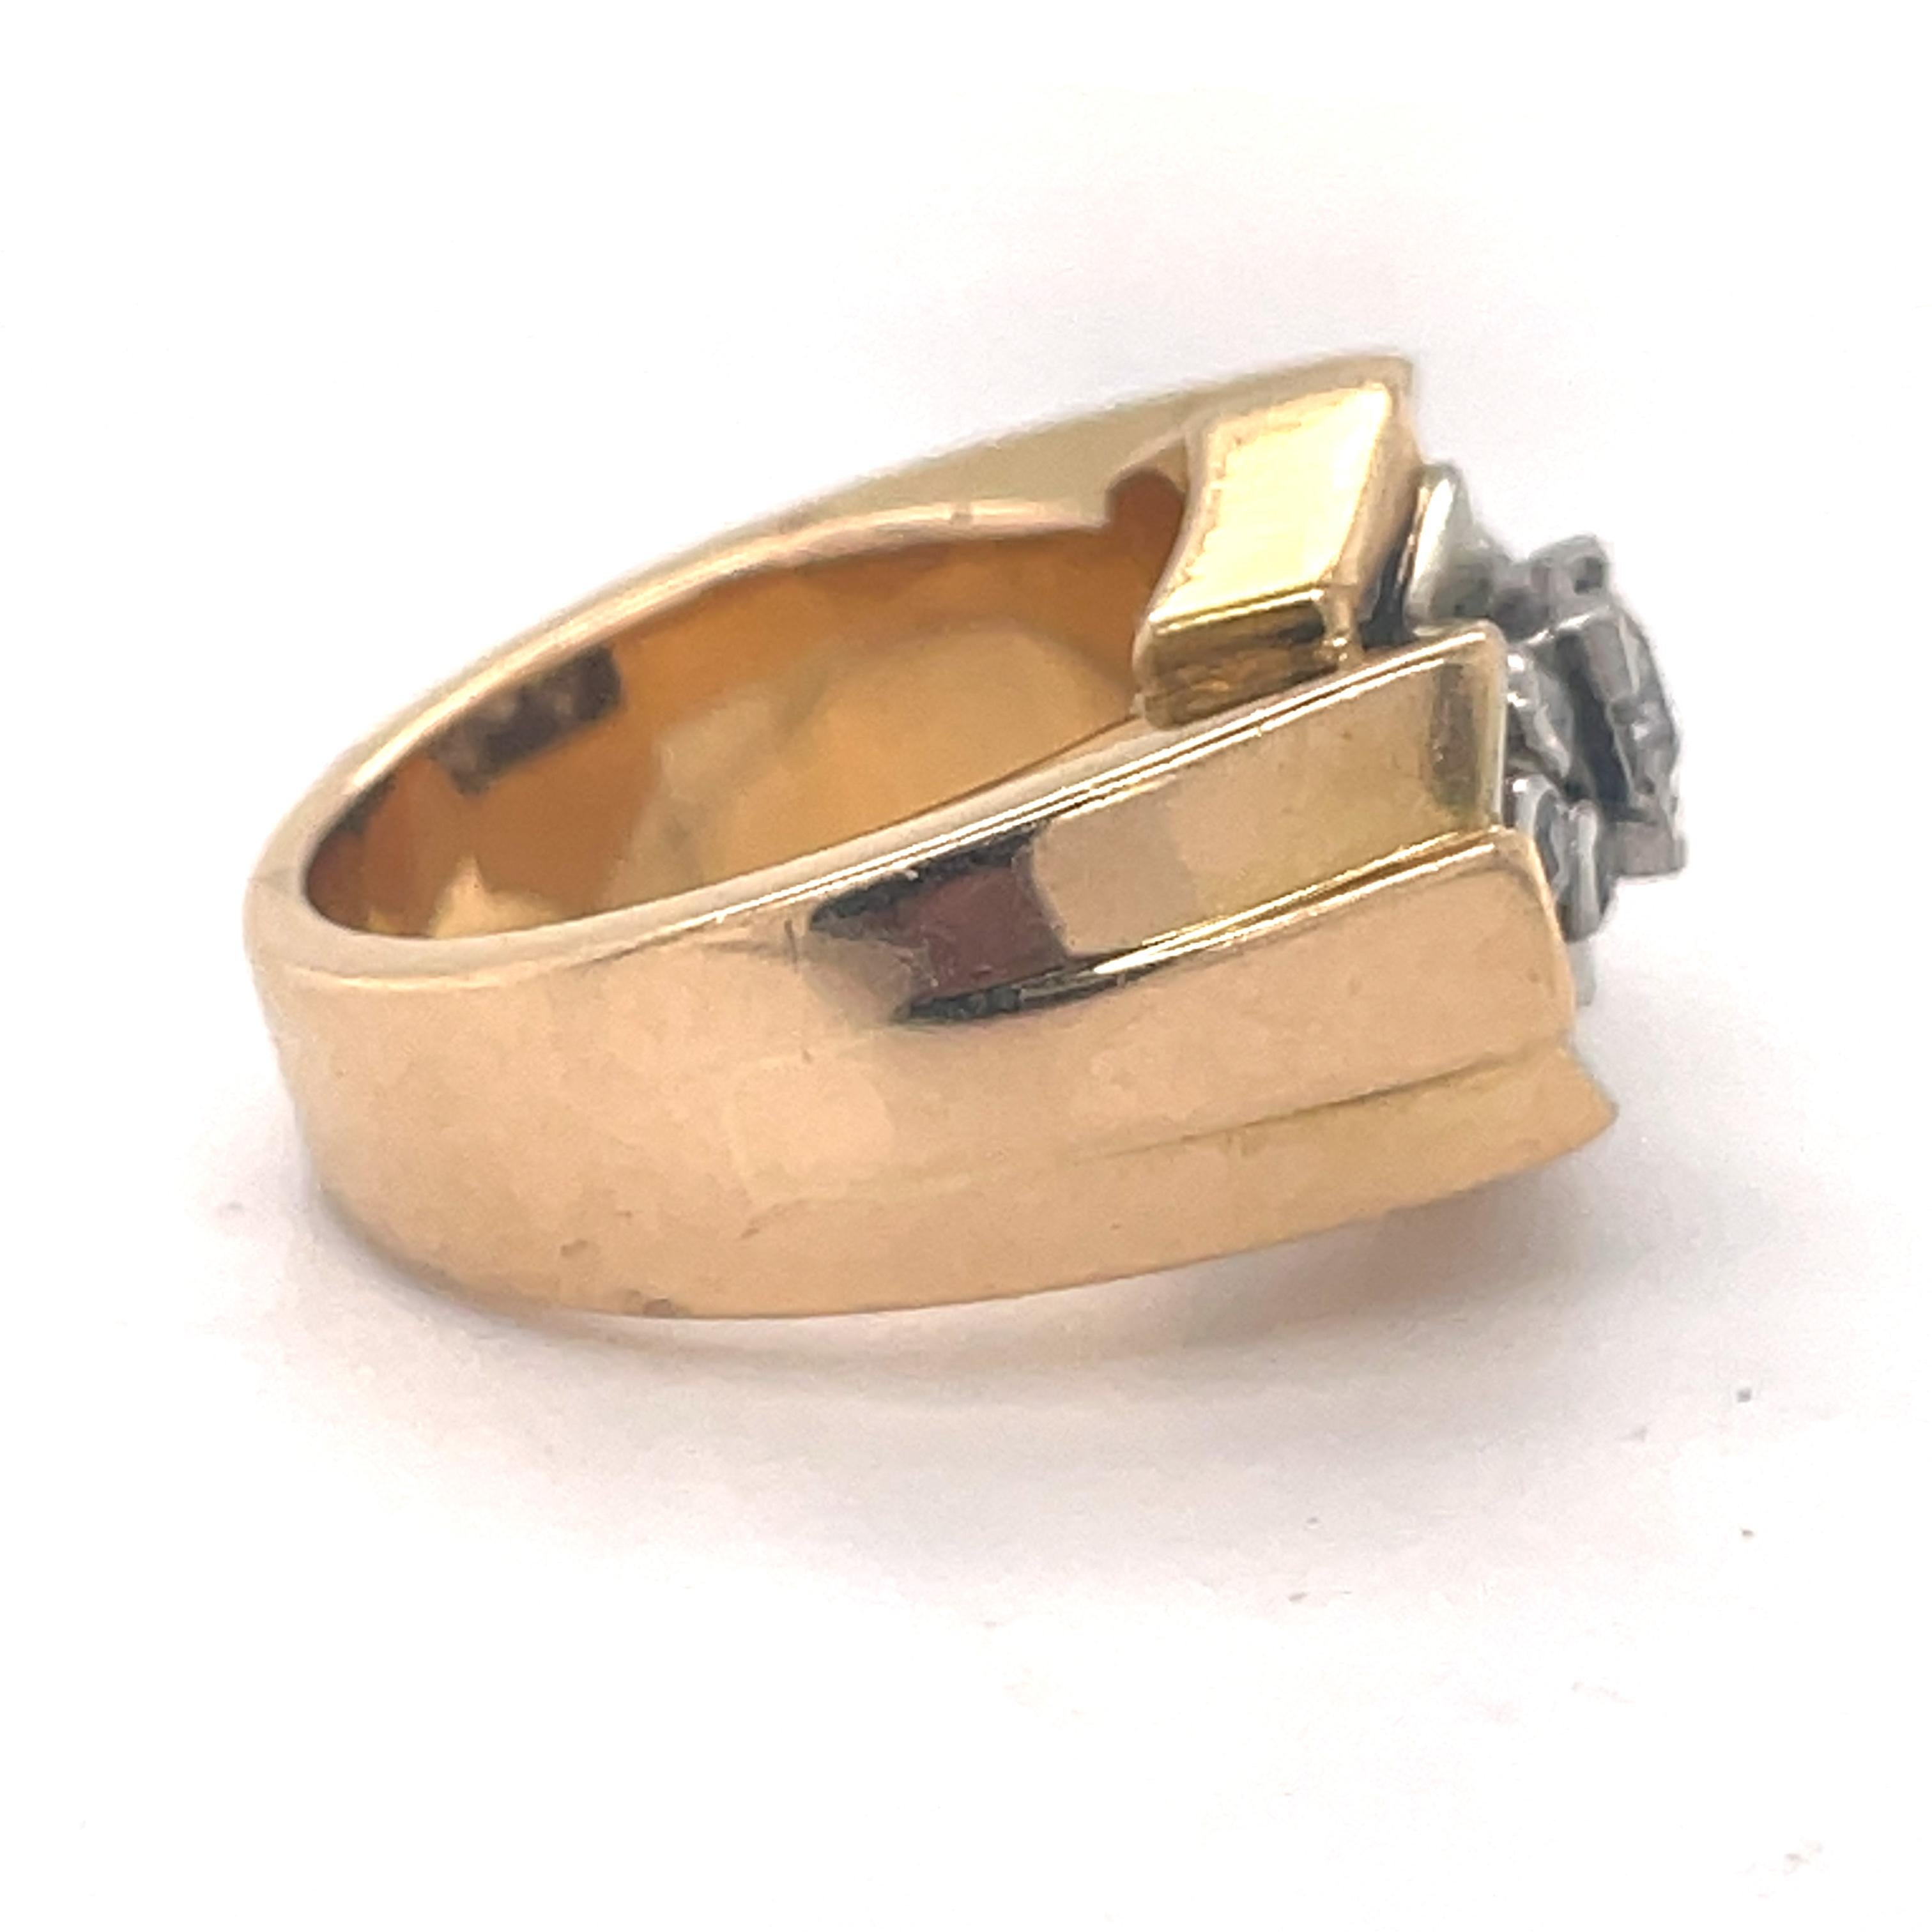 Vintage Tank ring, Geometric ring, Old European cut diamond, 18K Yellow gold

Jewelry Yellow Gold 18k  (the gold has been tested by a professional)
Total Carat Weight:0.38ct (Approx.)
Total Metal Weight: 11.94g
Size:6 US \ 16.51 mm (inner diameter)
